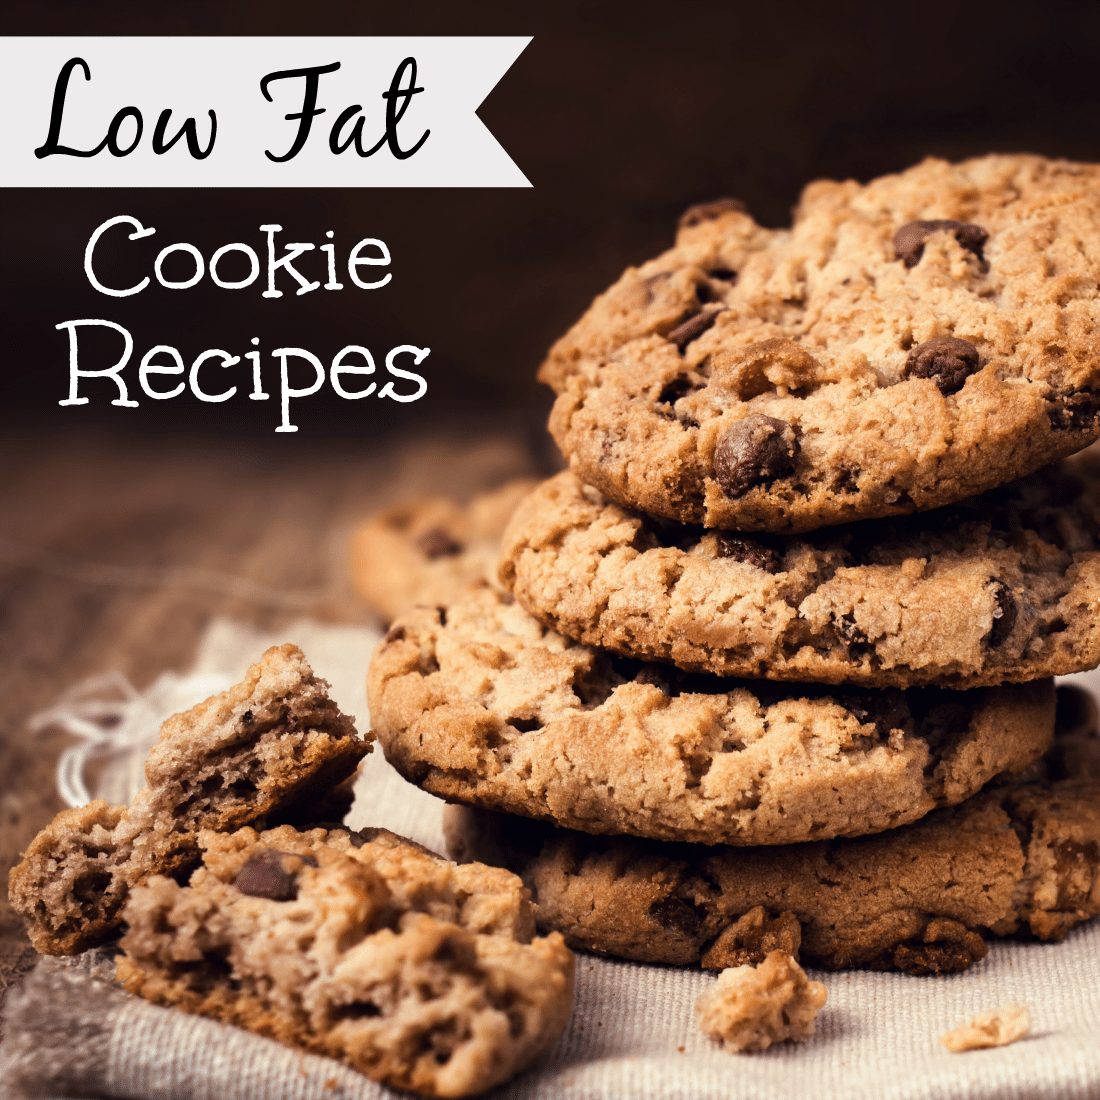 Low Fat Cookie Recipes